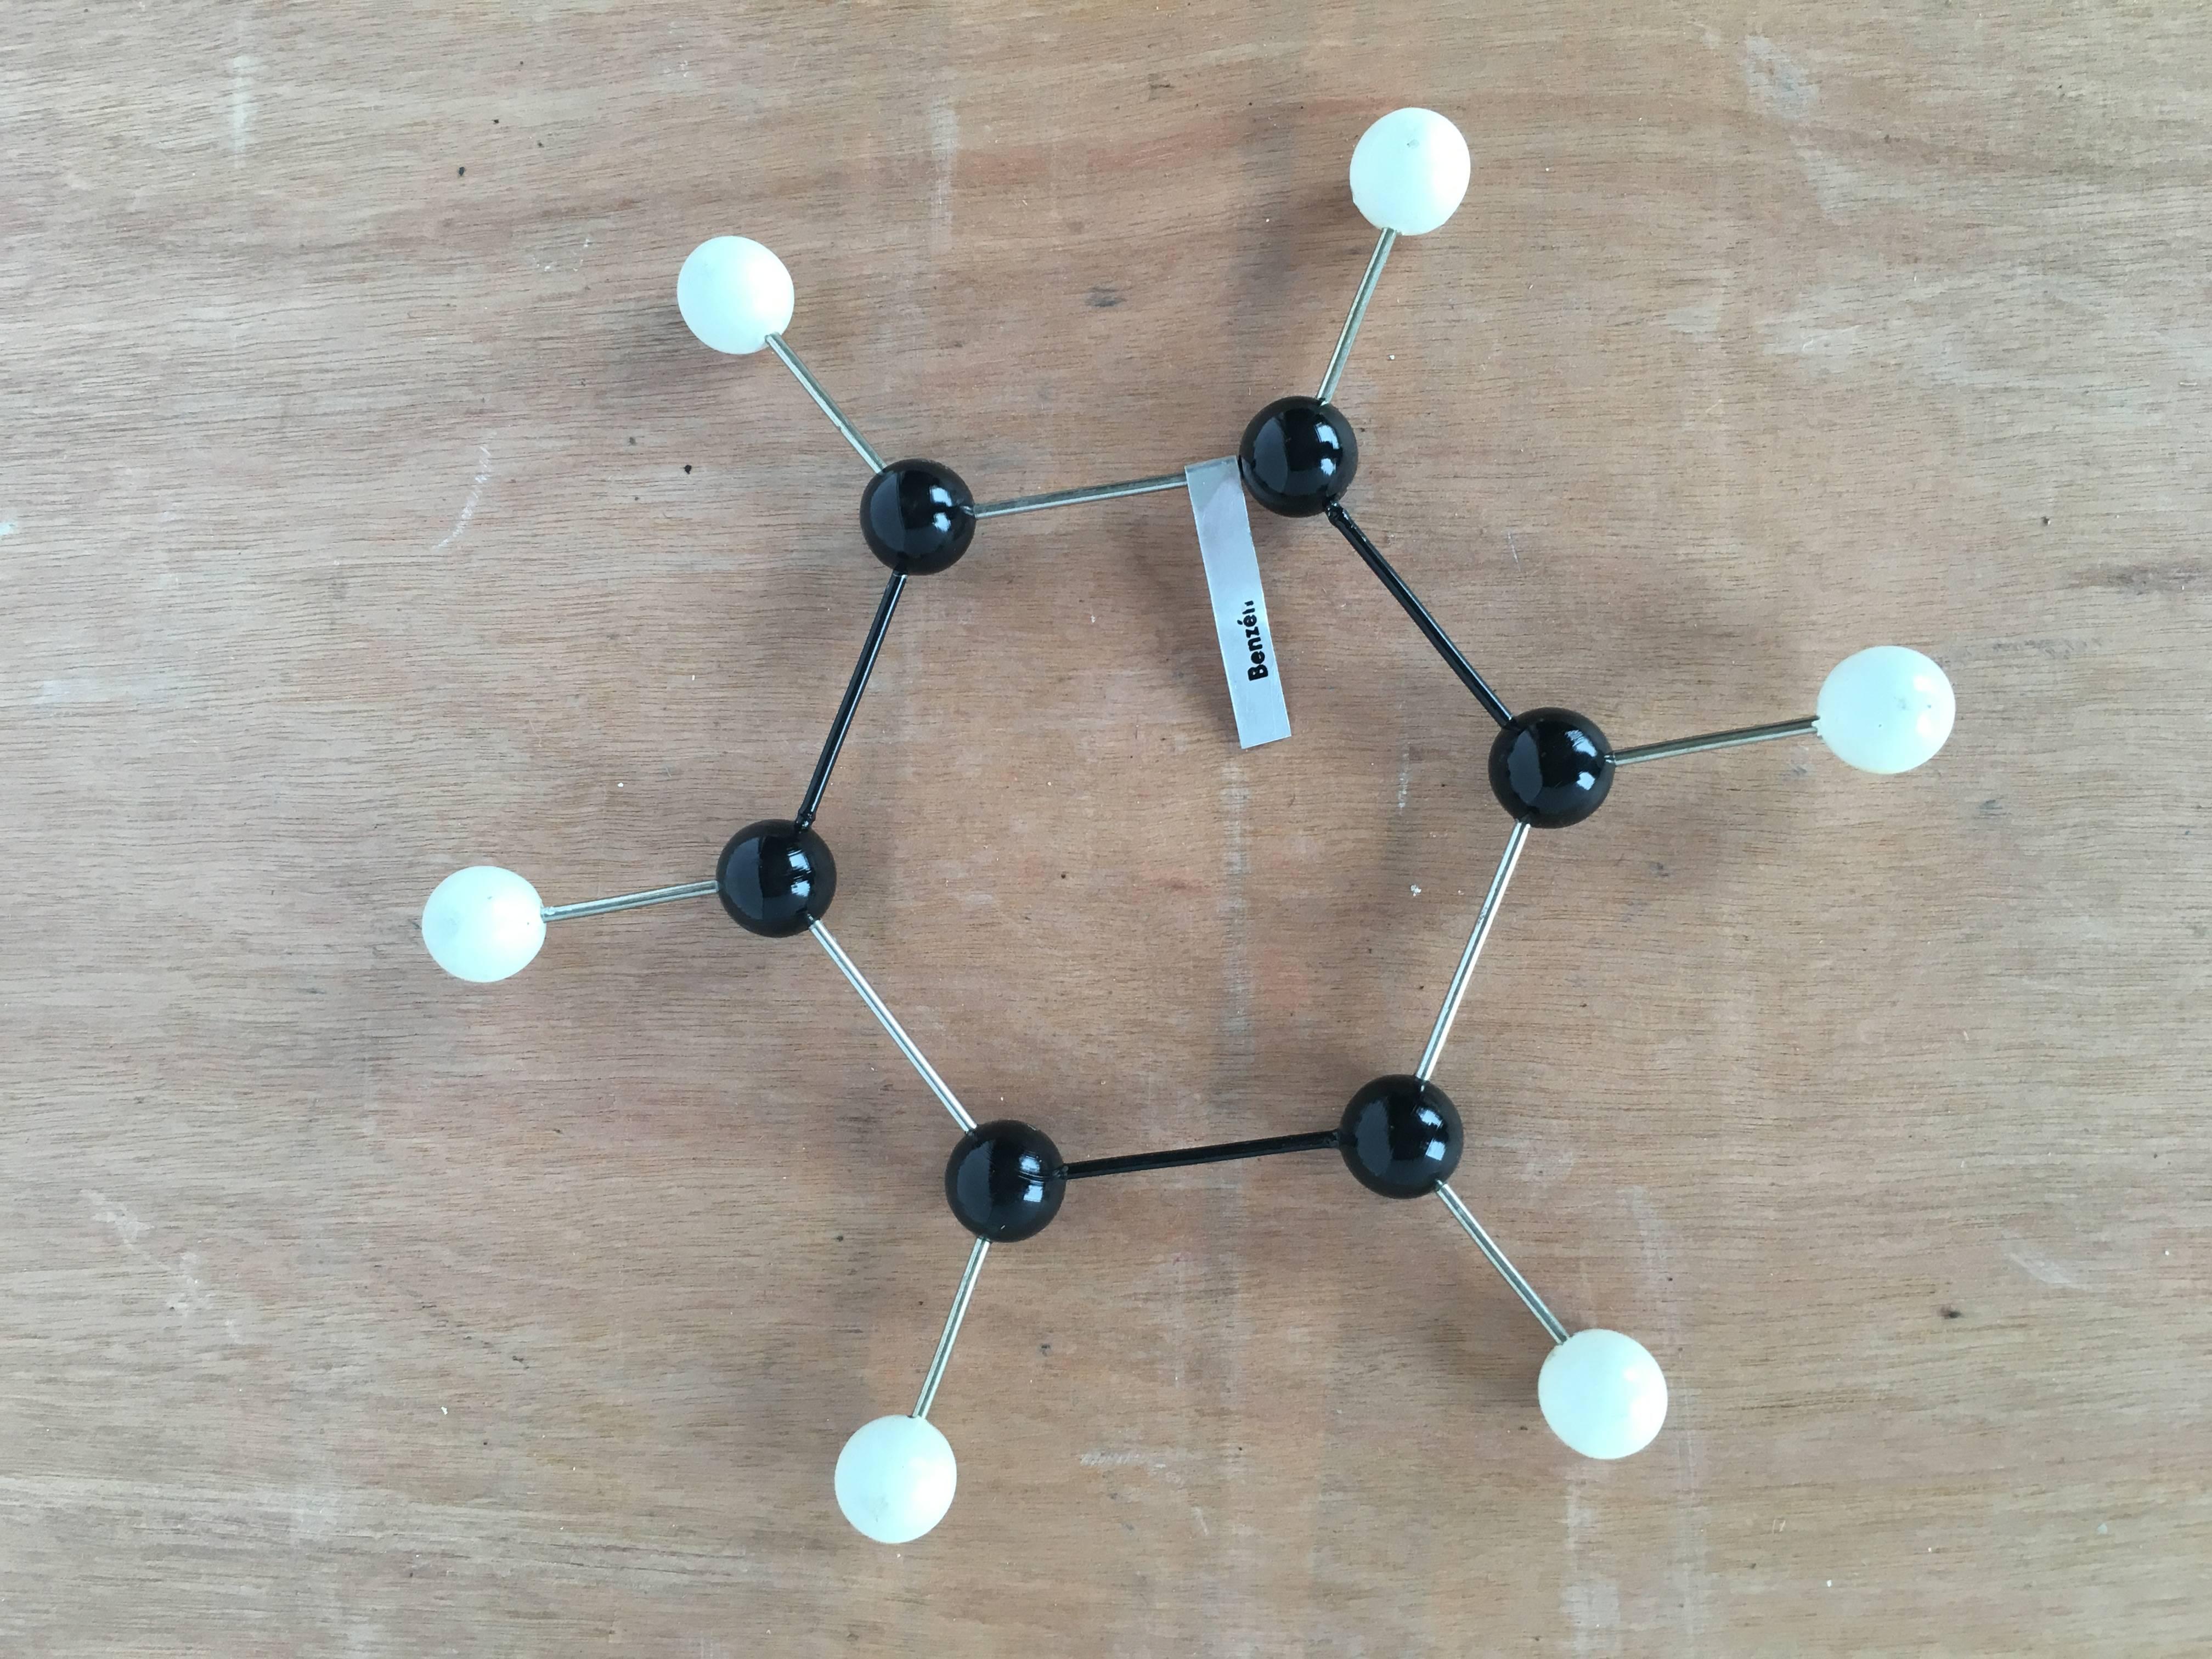 Vintage ball and stick molecular model depicting elemental structure of Benzene, circa 1950s.